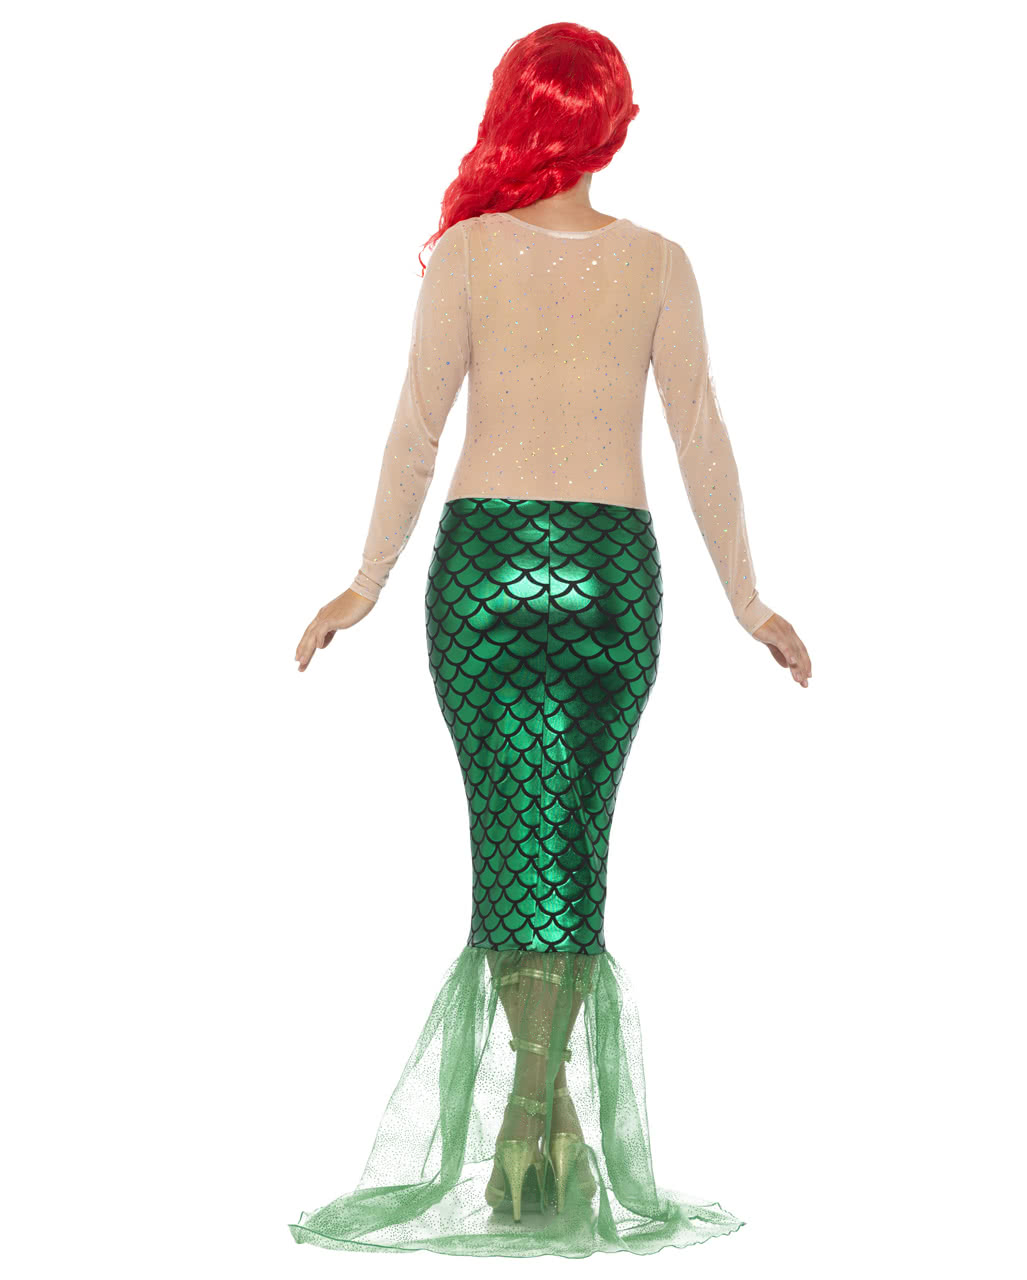 Sexy Mermaid Costume Deluxe For Carnival Horror 